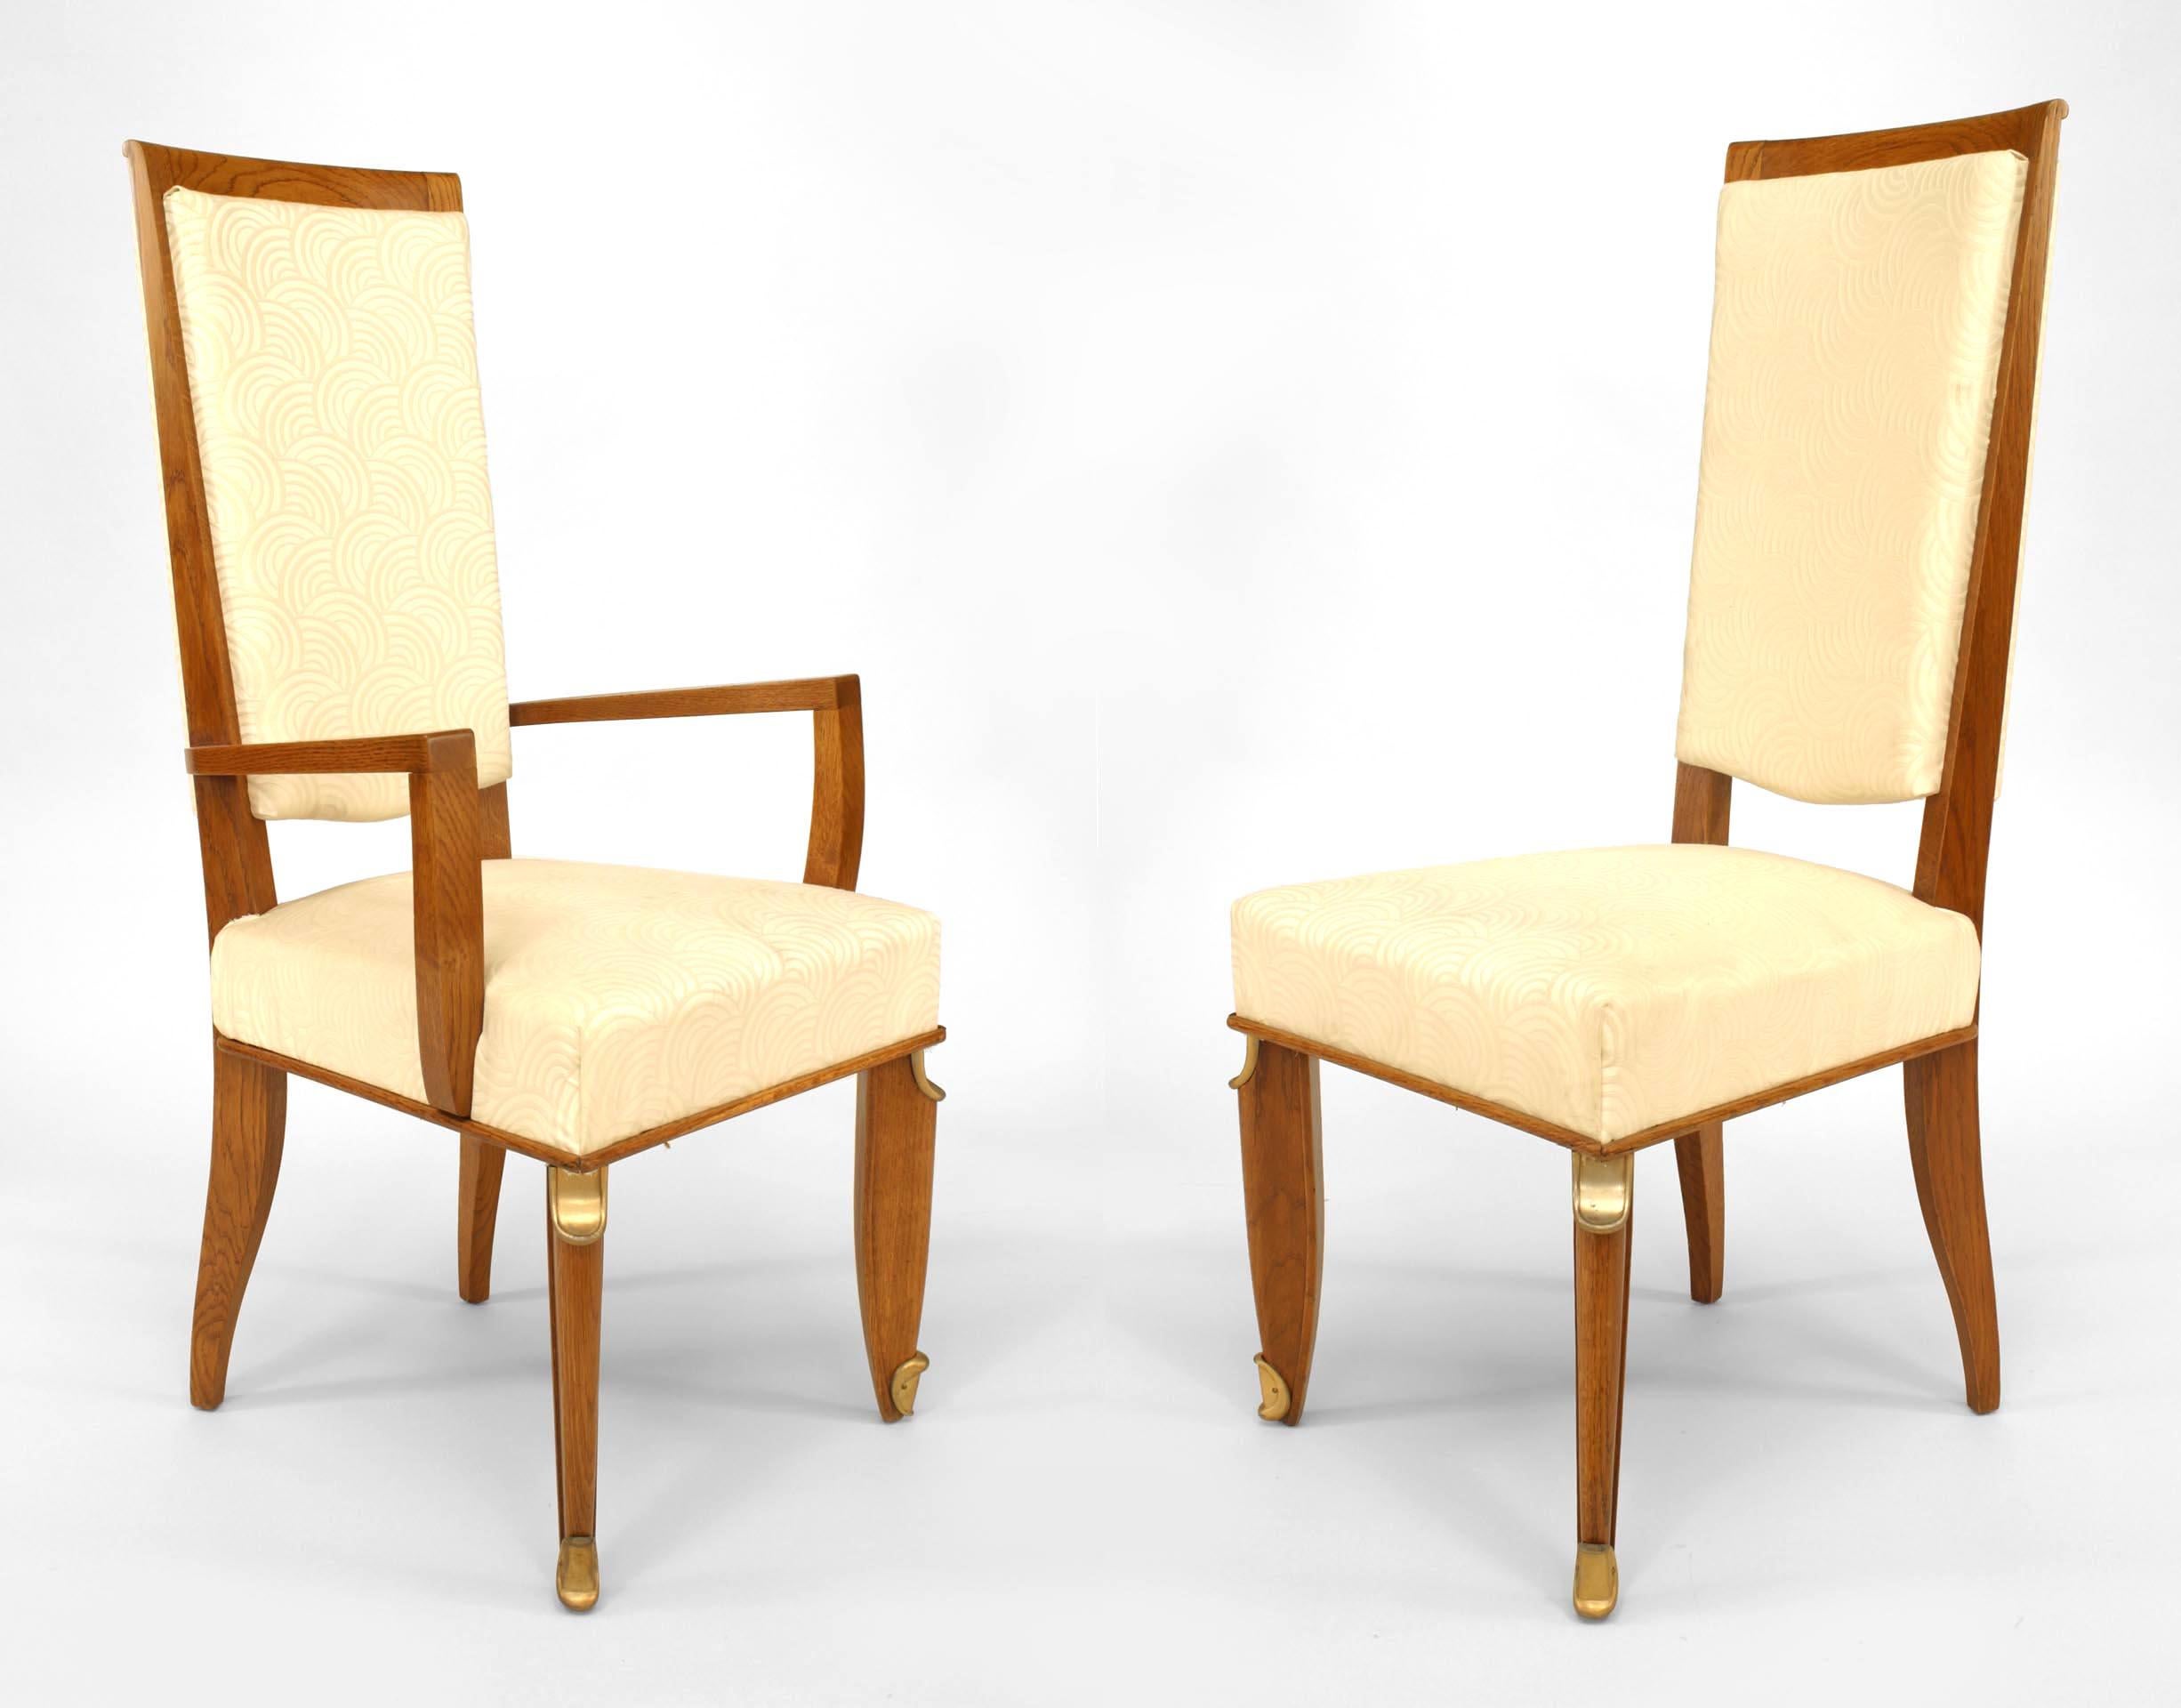 Set of 8 French 1940s bronze mounted oak high back dining chairs upholstered in white silk (att: MAURICE JALLOT) (2 arm chairs: 21¬æ